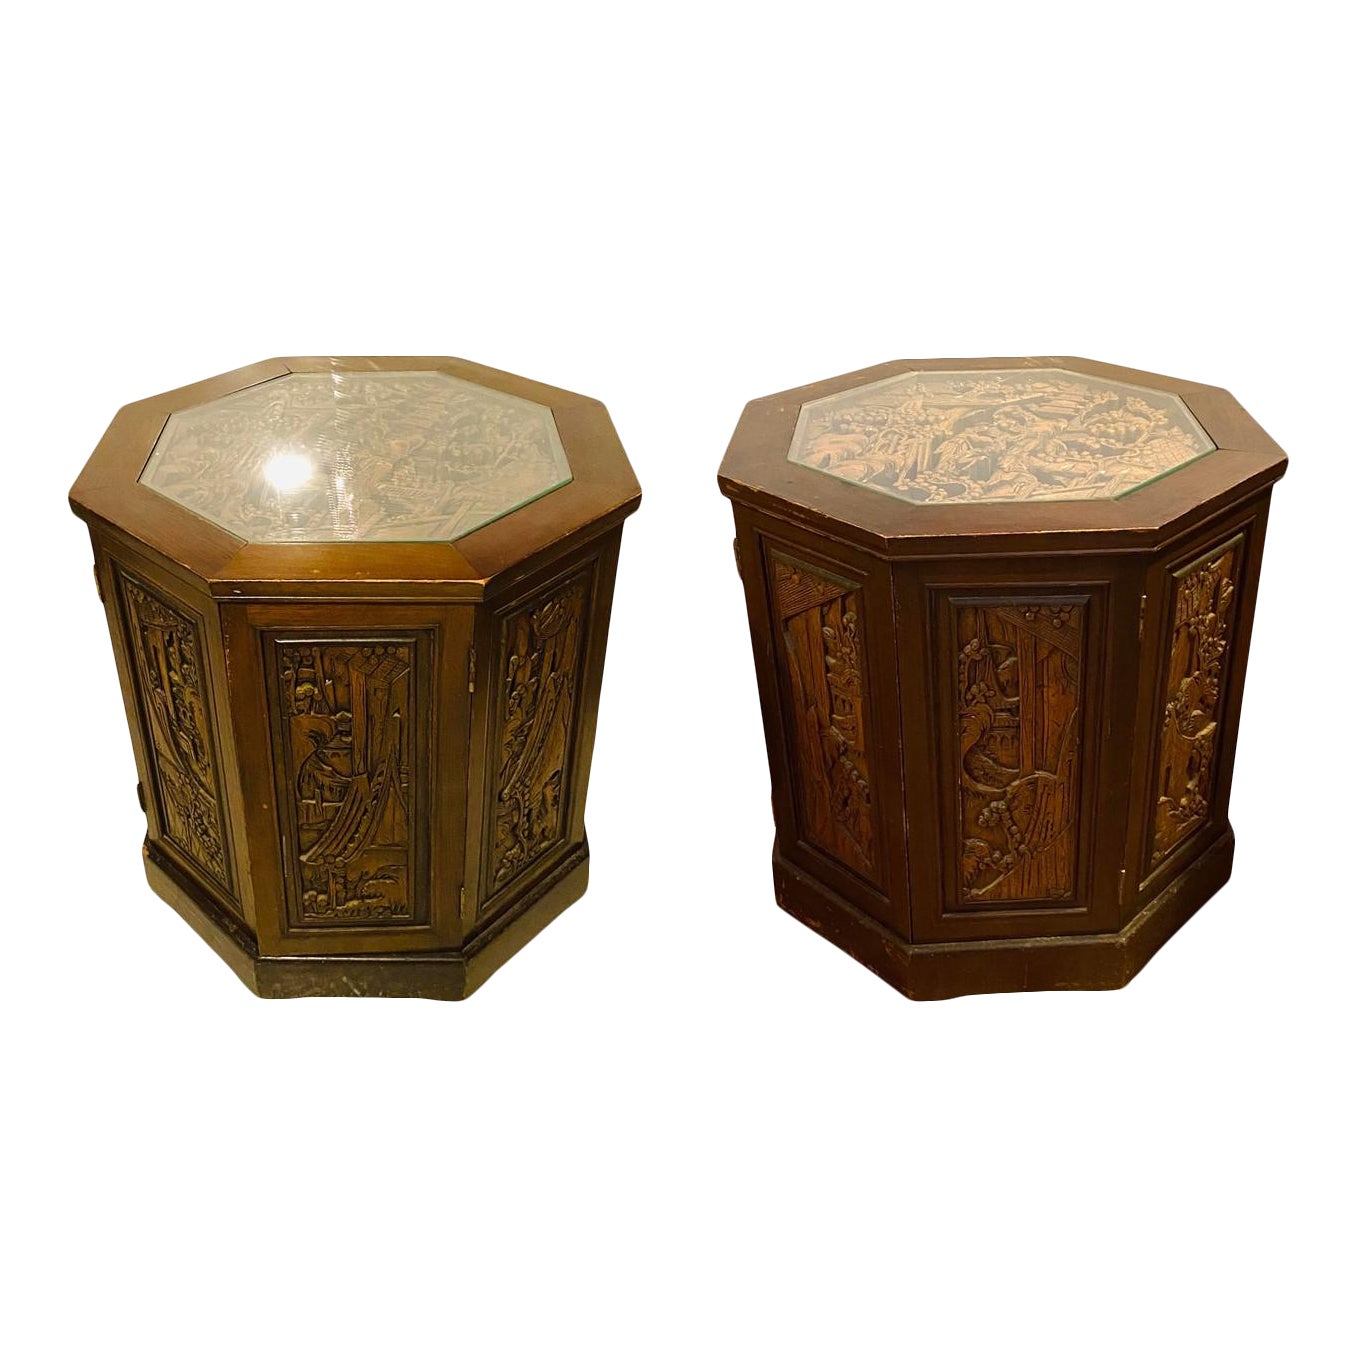 Ornate Asian Carved Wood Hexagon Cabinets Tables Glass Top - Pair of 2